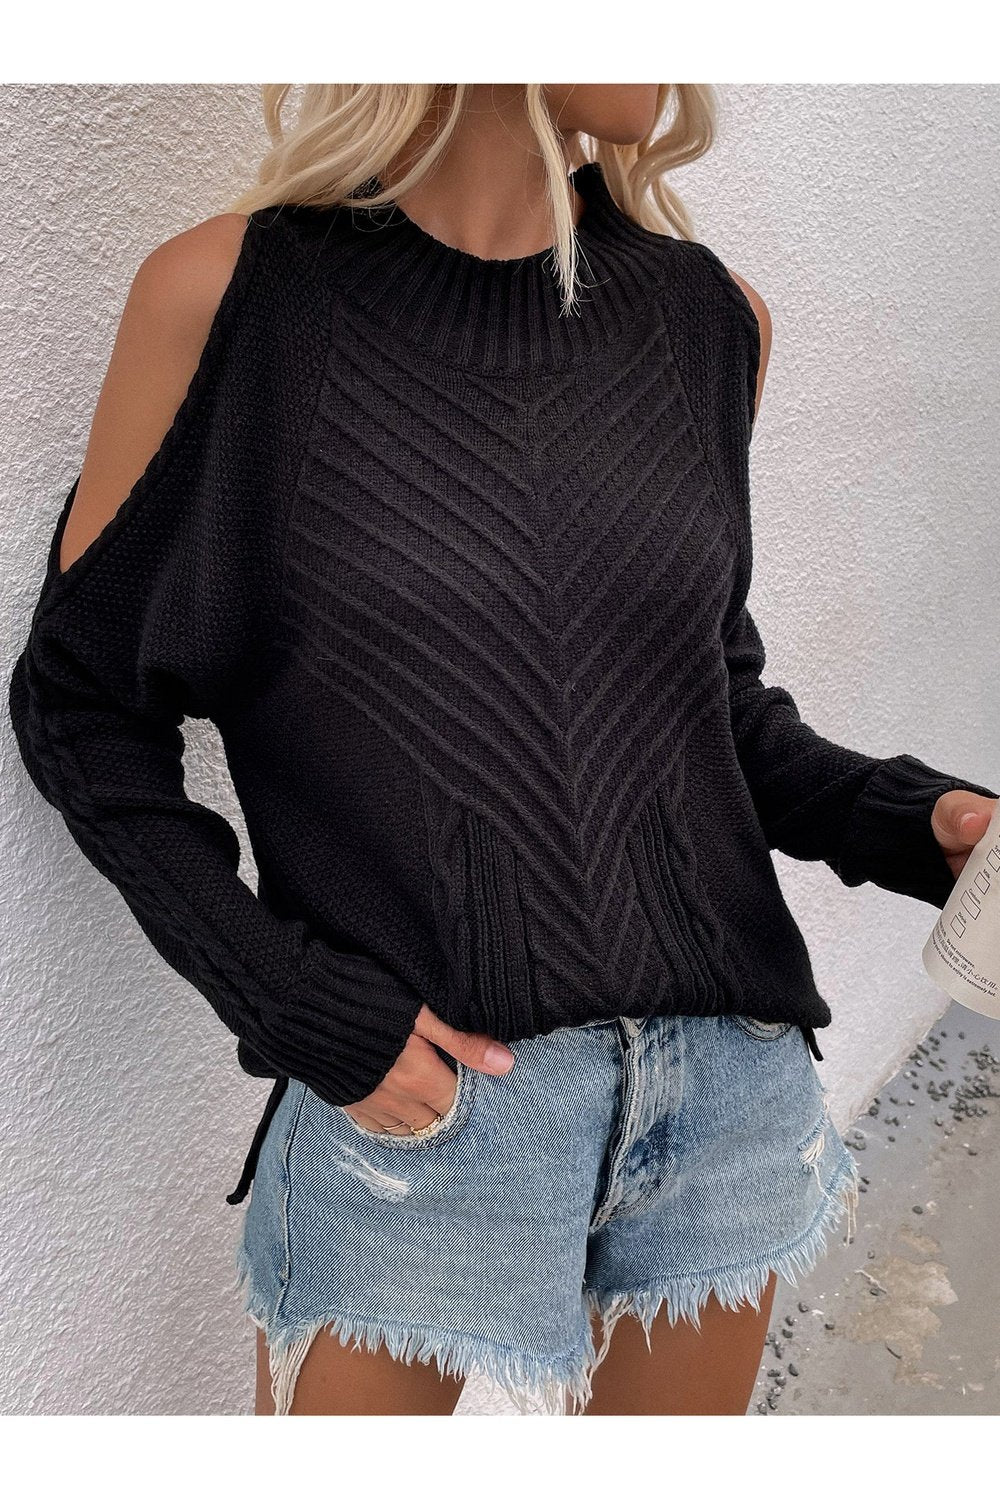 Cable-Knit Cold Shoulder Sweater - Pullover Sweaters - FITGGINS